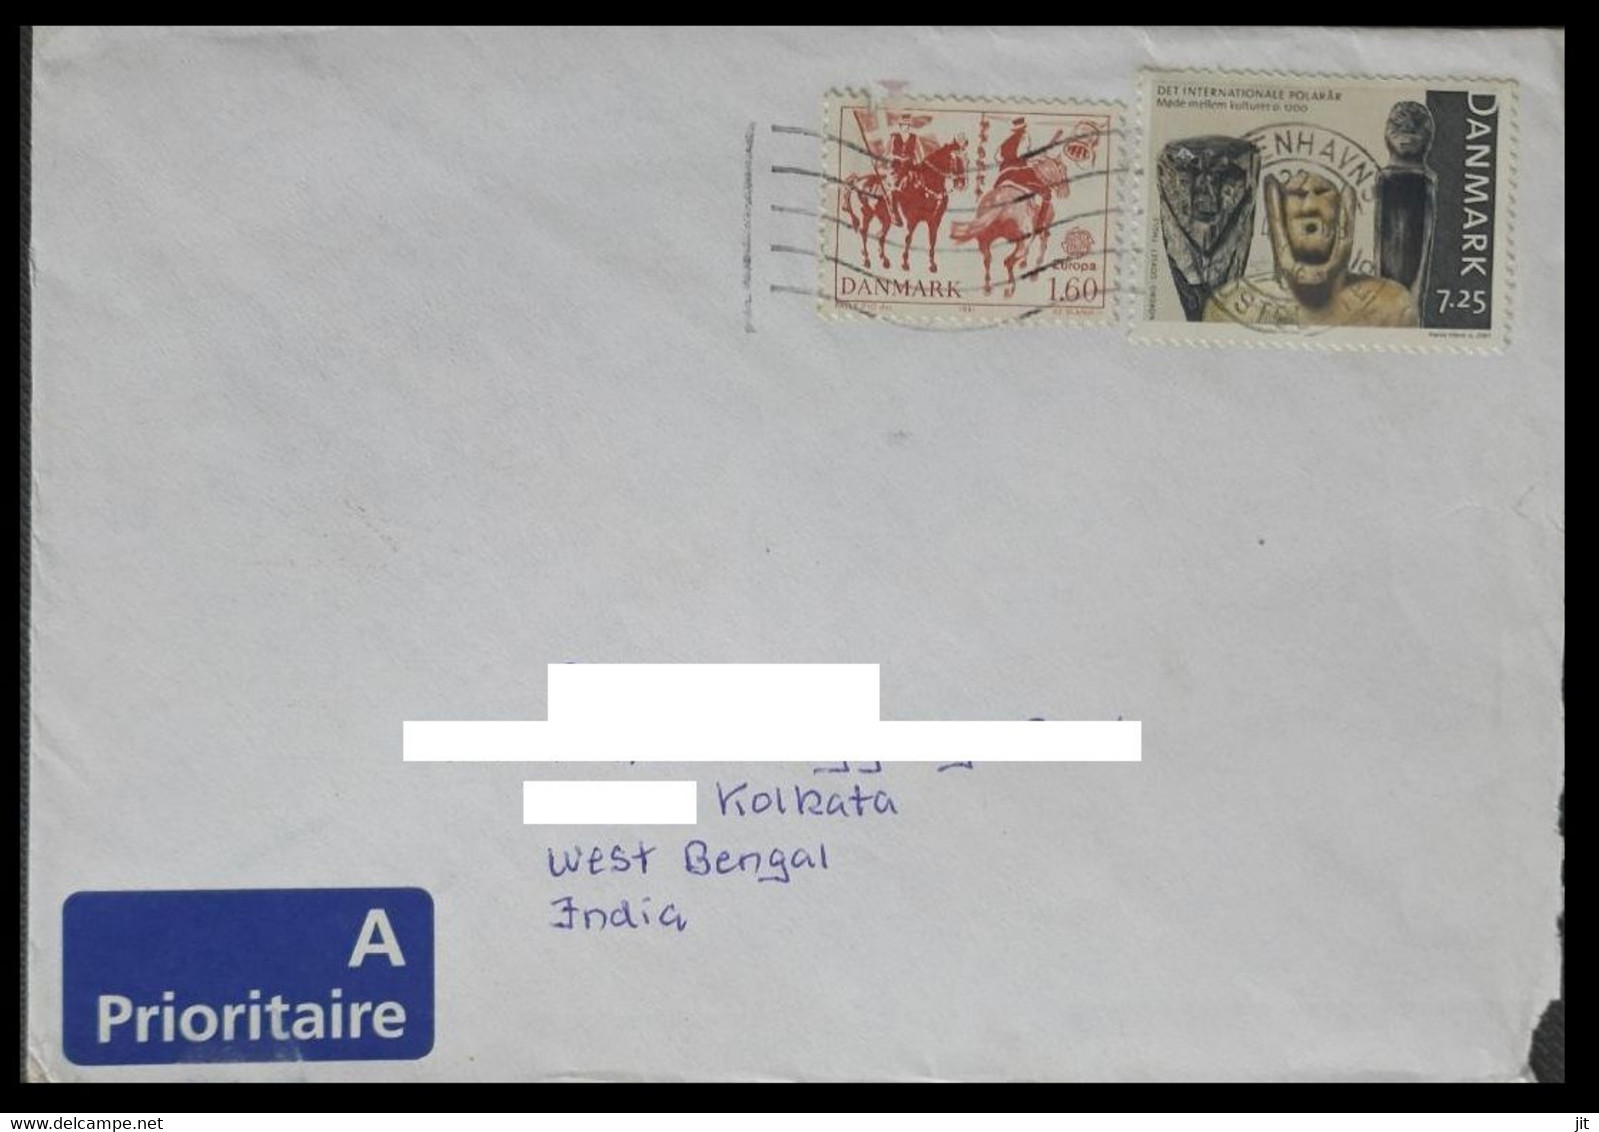 165.DENMARK USED AIRMAIL COVER TO INDIA WITH STAMPS ,EUROPA, HORSE. - Covers & Documents